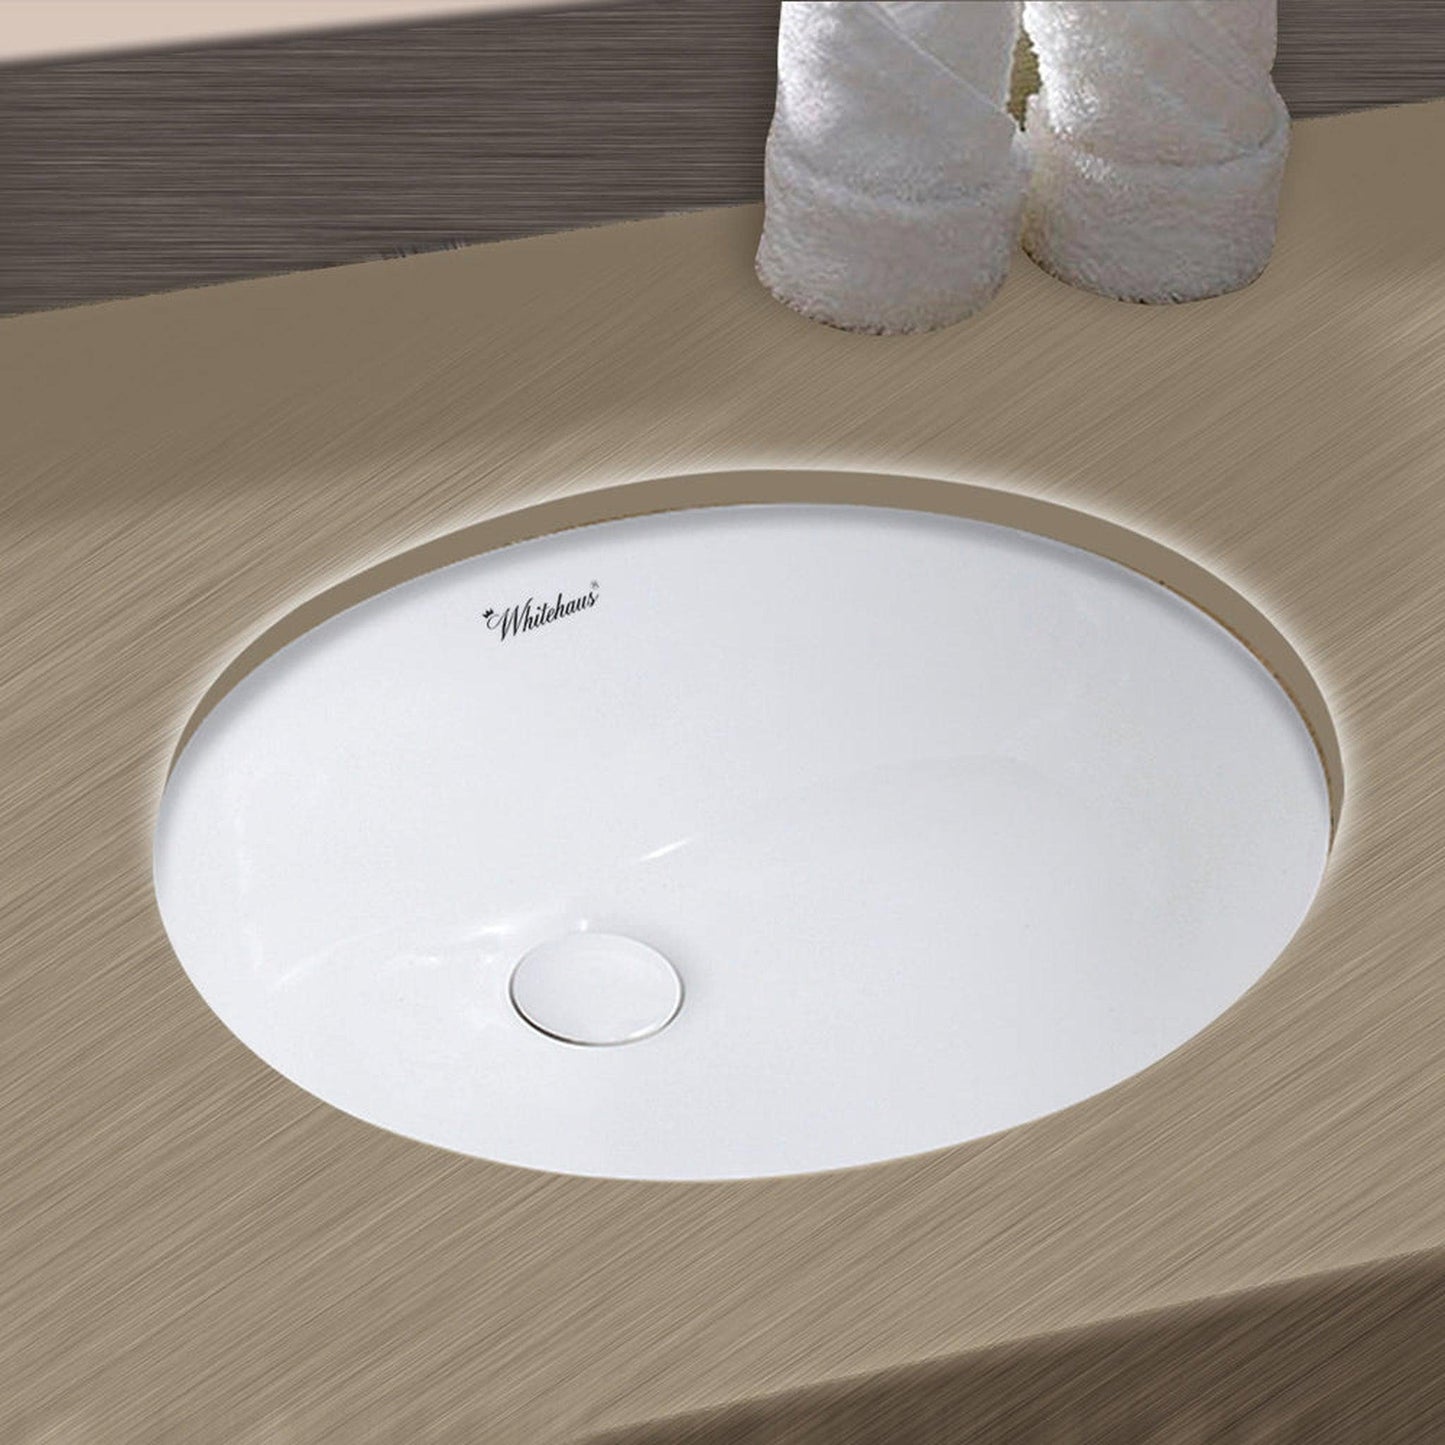 Whitehaus Isabella Plus WHU71001 White Oval Undermount Basin With Overflow and Rear Center Drain